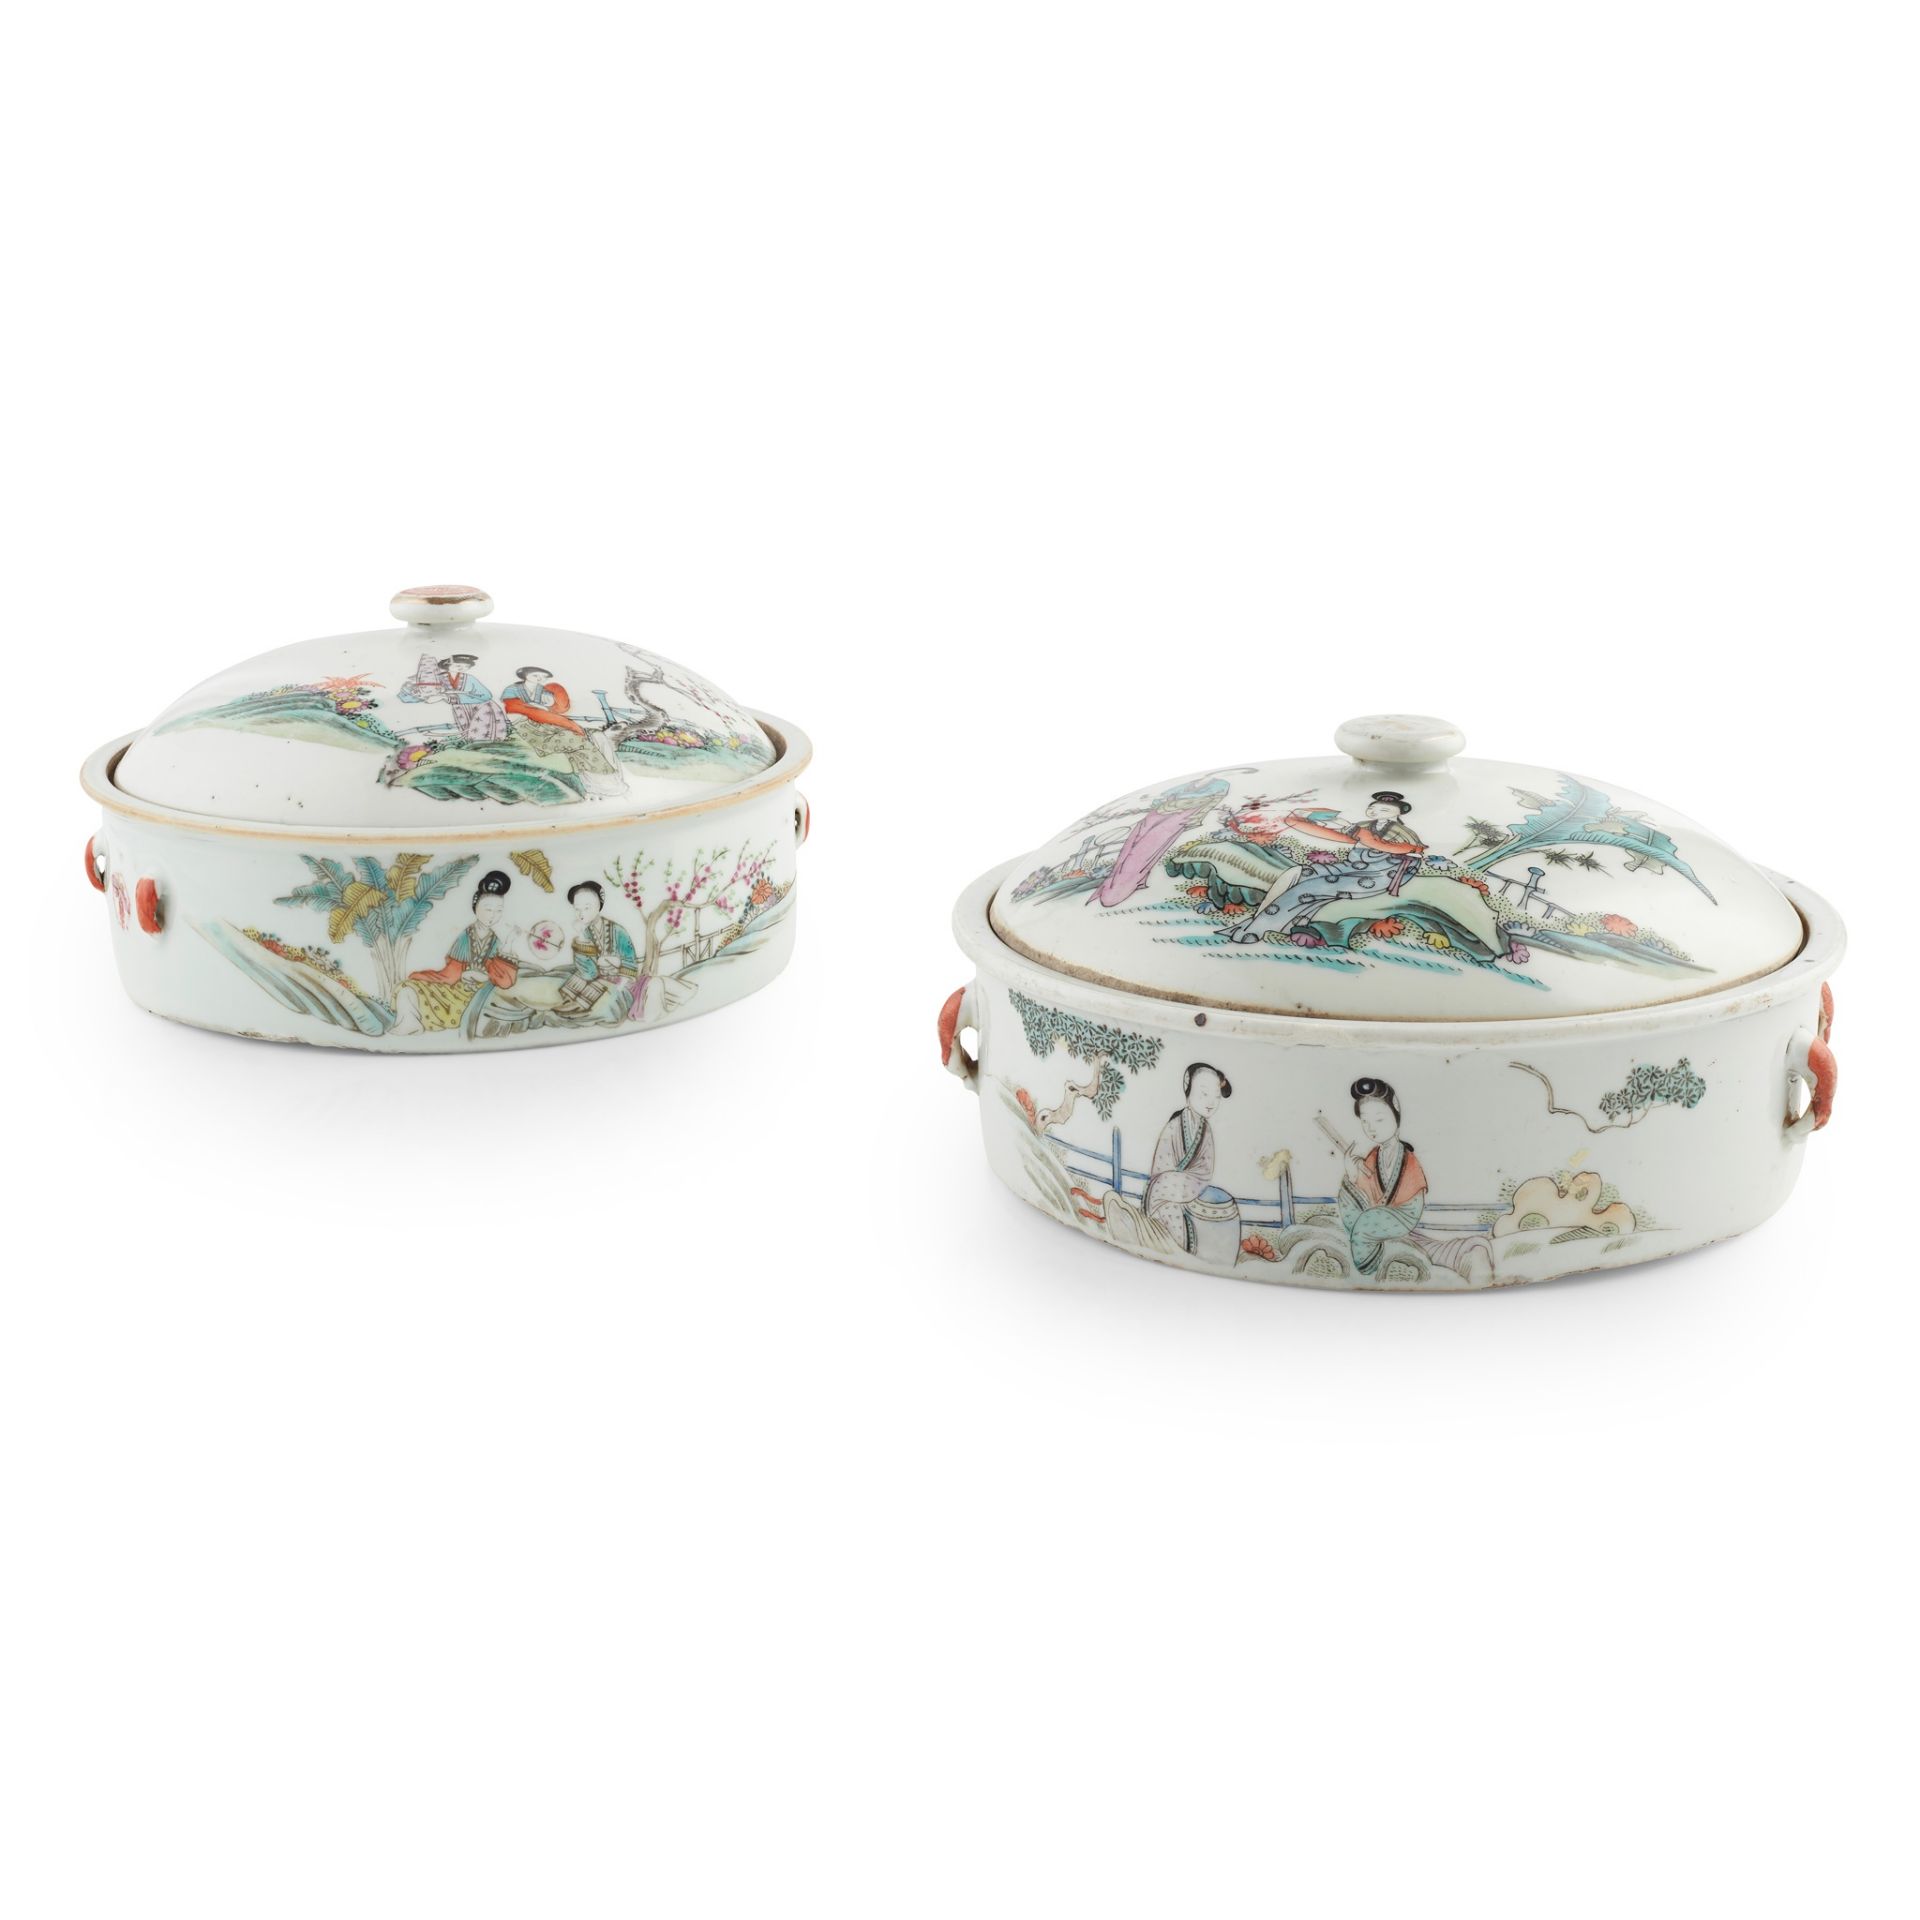 PAIR OF FAMILLE ROSE 'LADIES' POTS WITH COVERS REPUBLIC PERIOD OR LATER